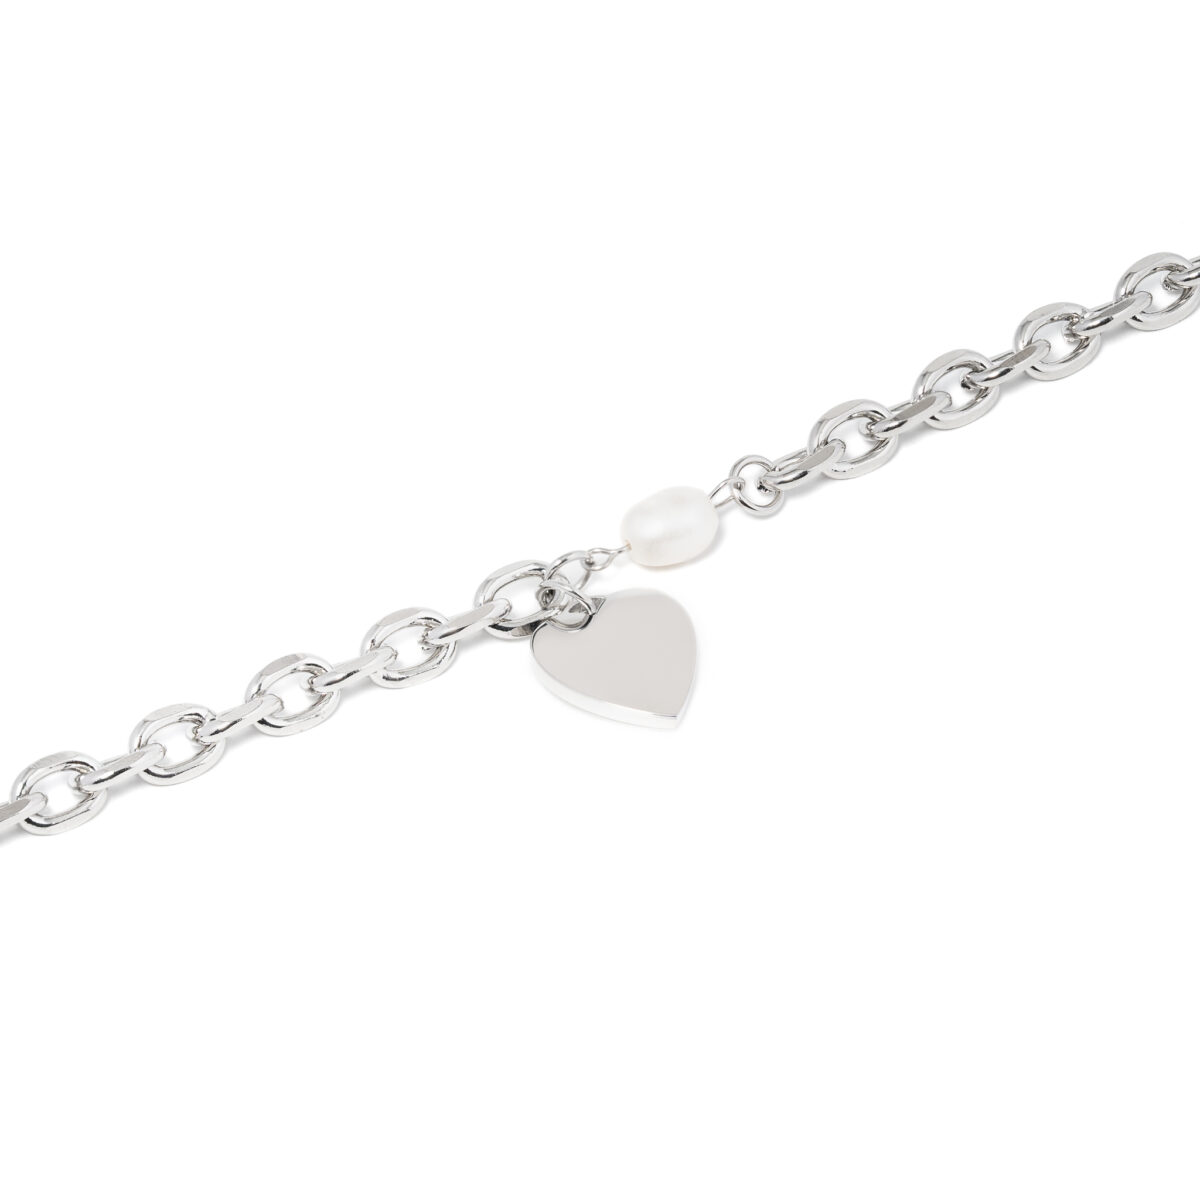 https://m.clubbella.co/product/agate-silver-heart-charm-bracelet/ Agate Silver Heart Charm Bracelet (2)